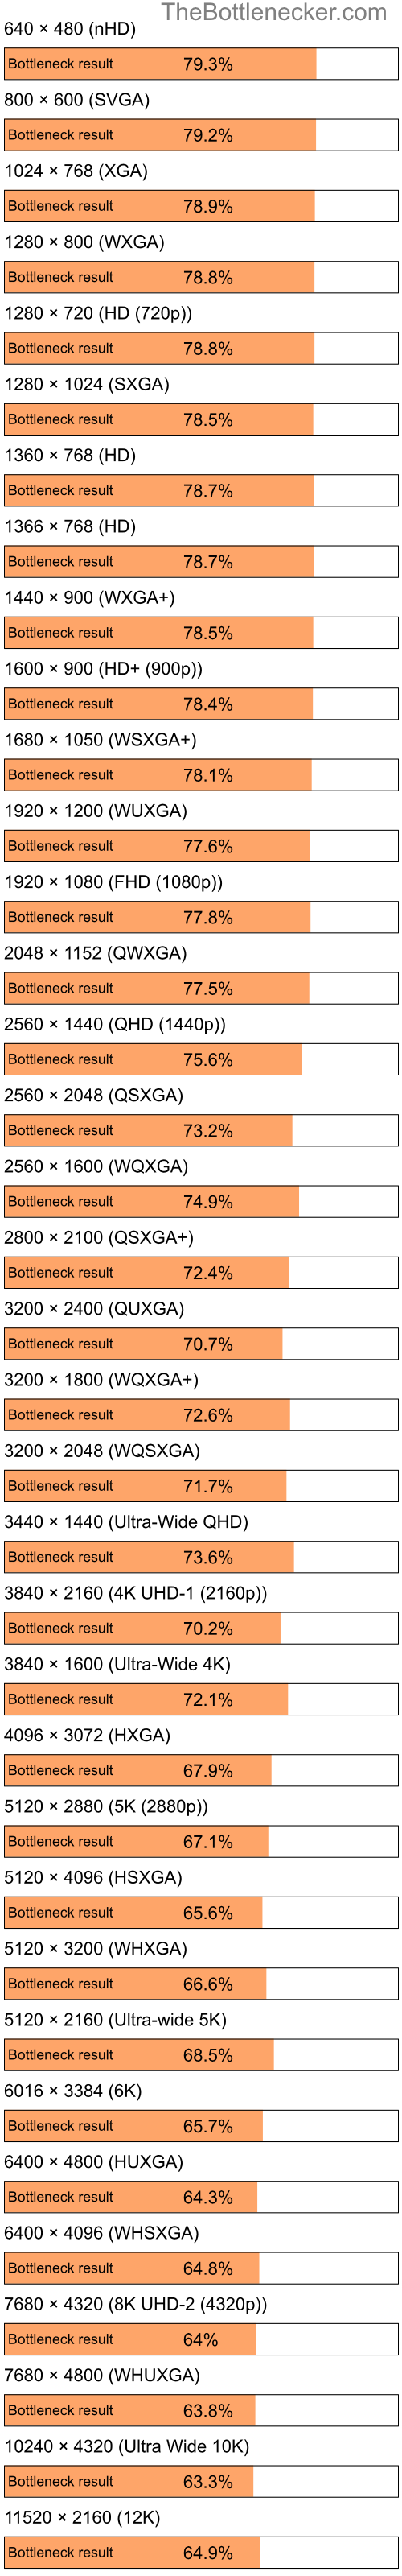 Bottleneck results by resolution for AMD Phenom II X4 810 and NVIDIA GeForce RTX 3070 Ti in Processor Intense Tasks